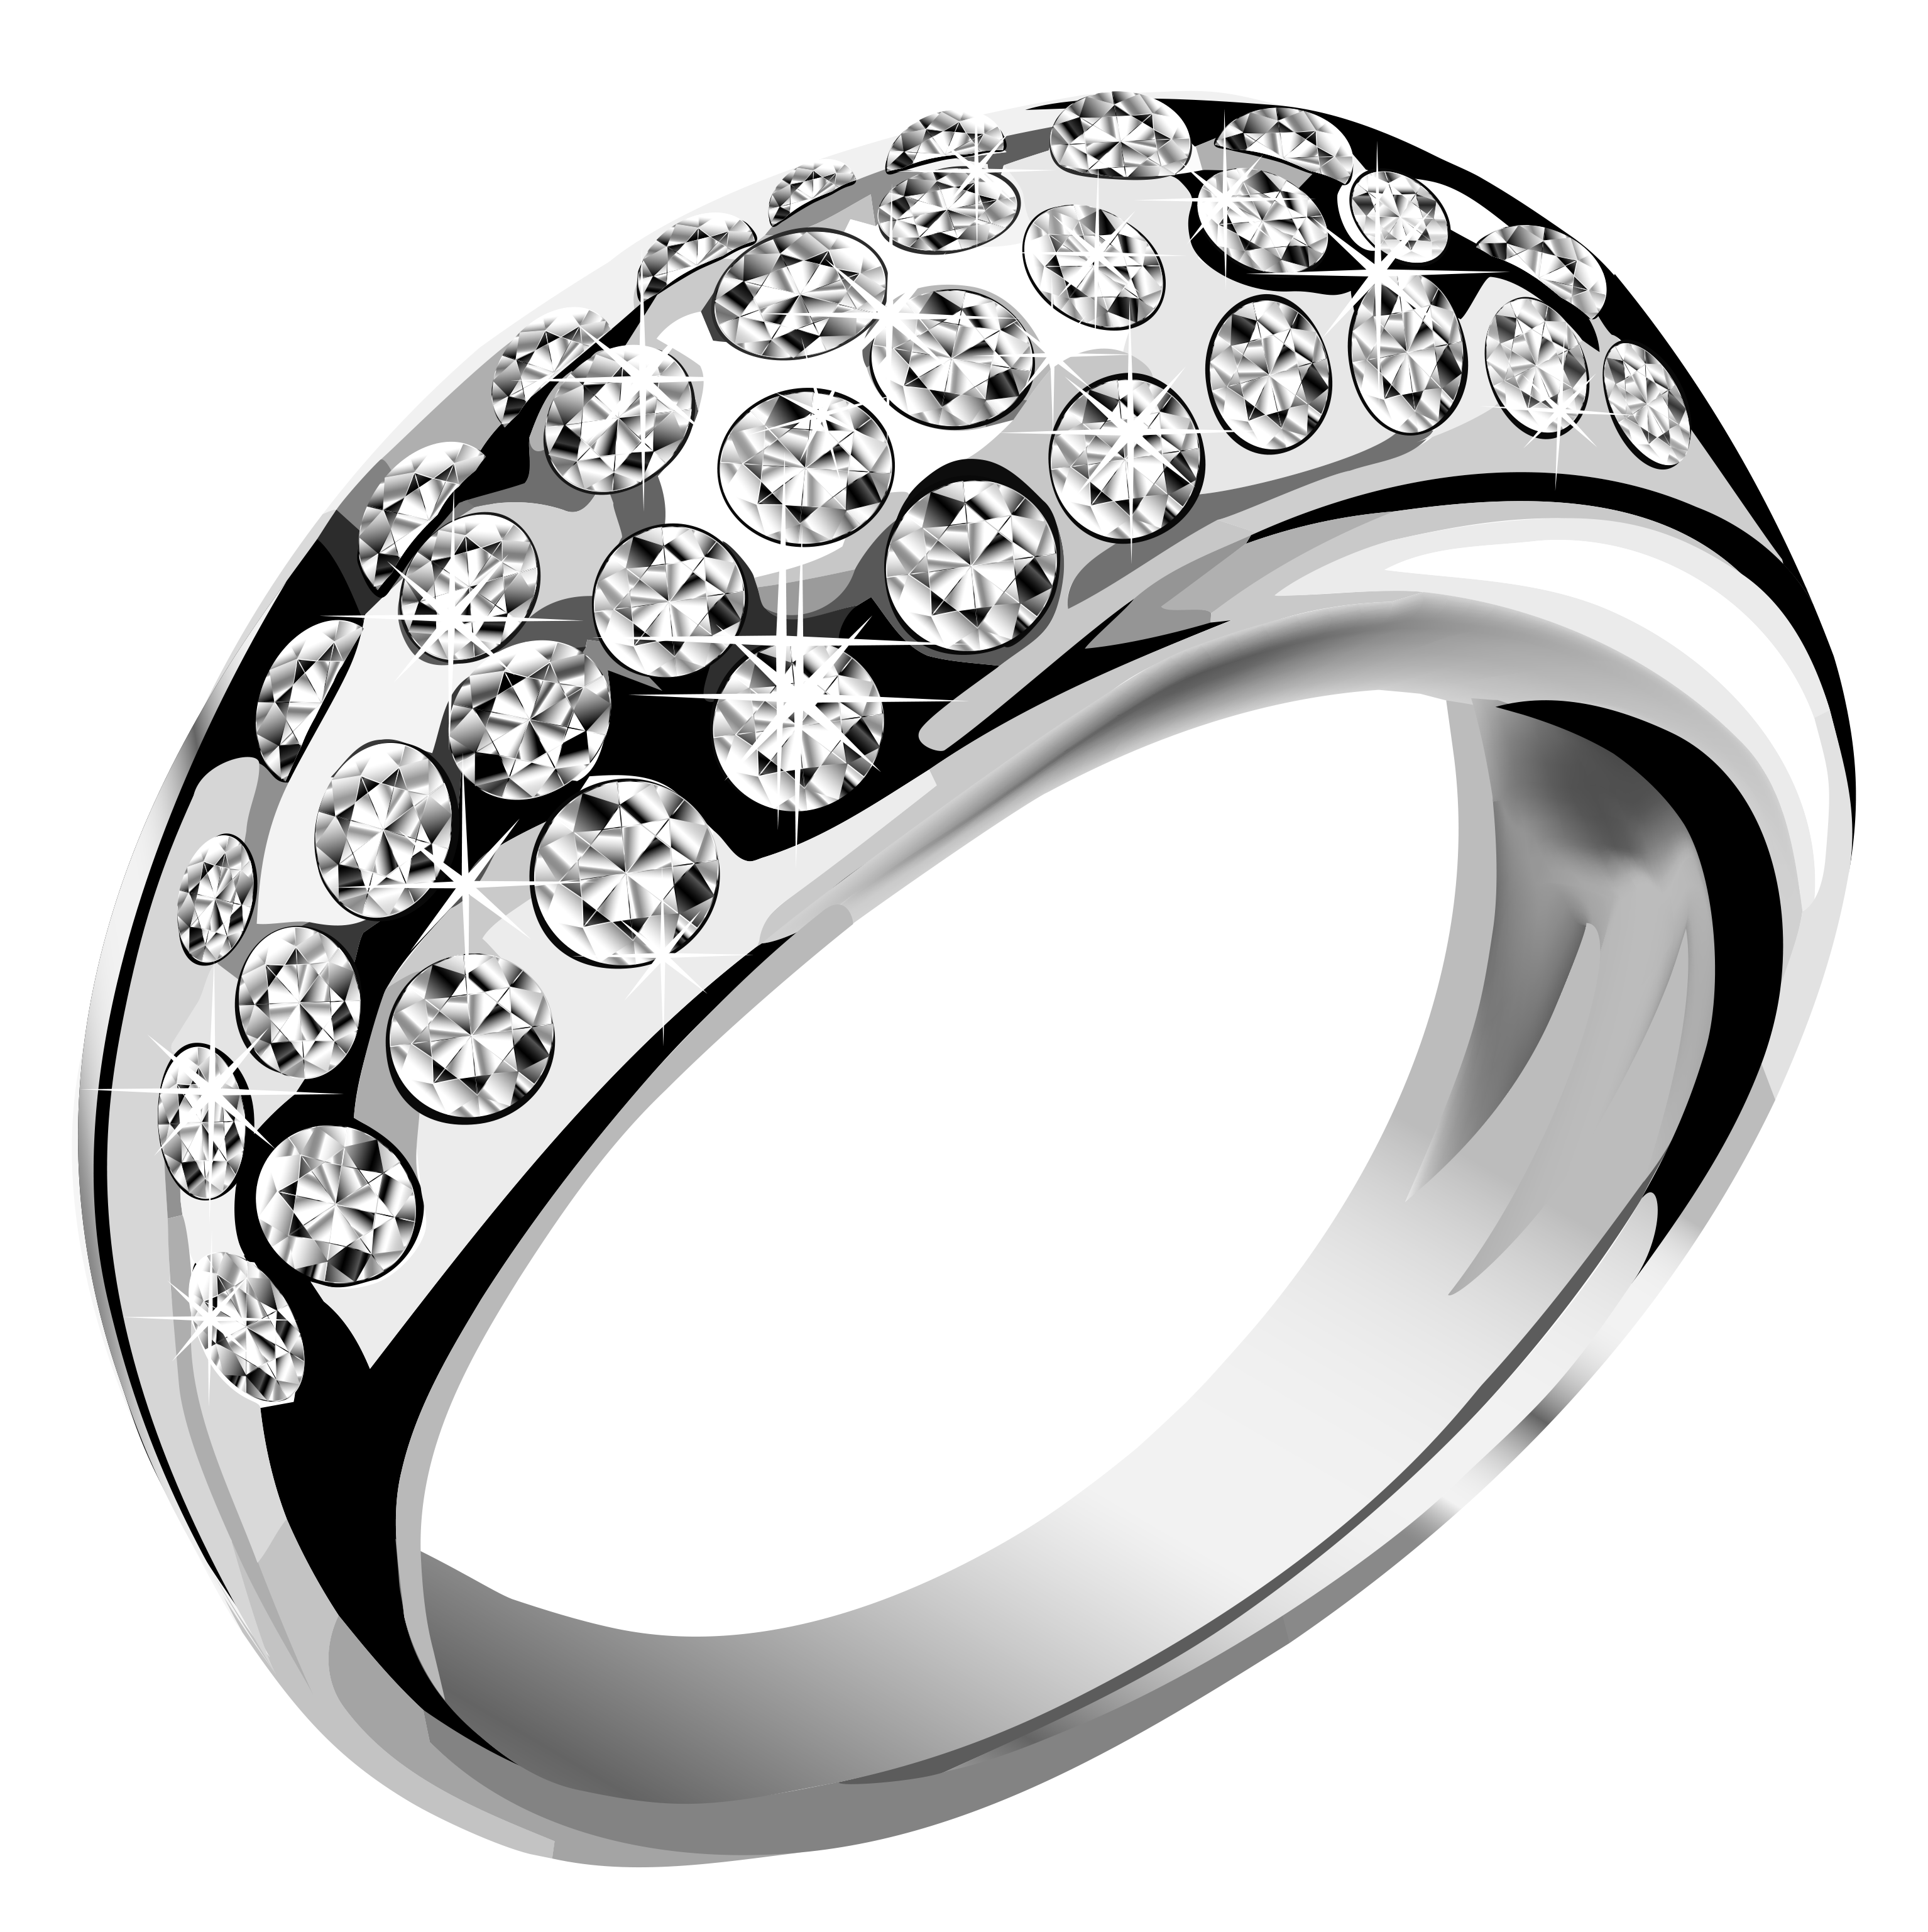 Silver Ring PNG Image Background